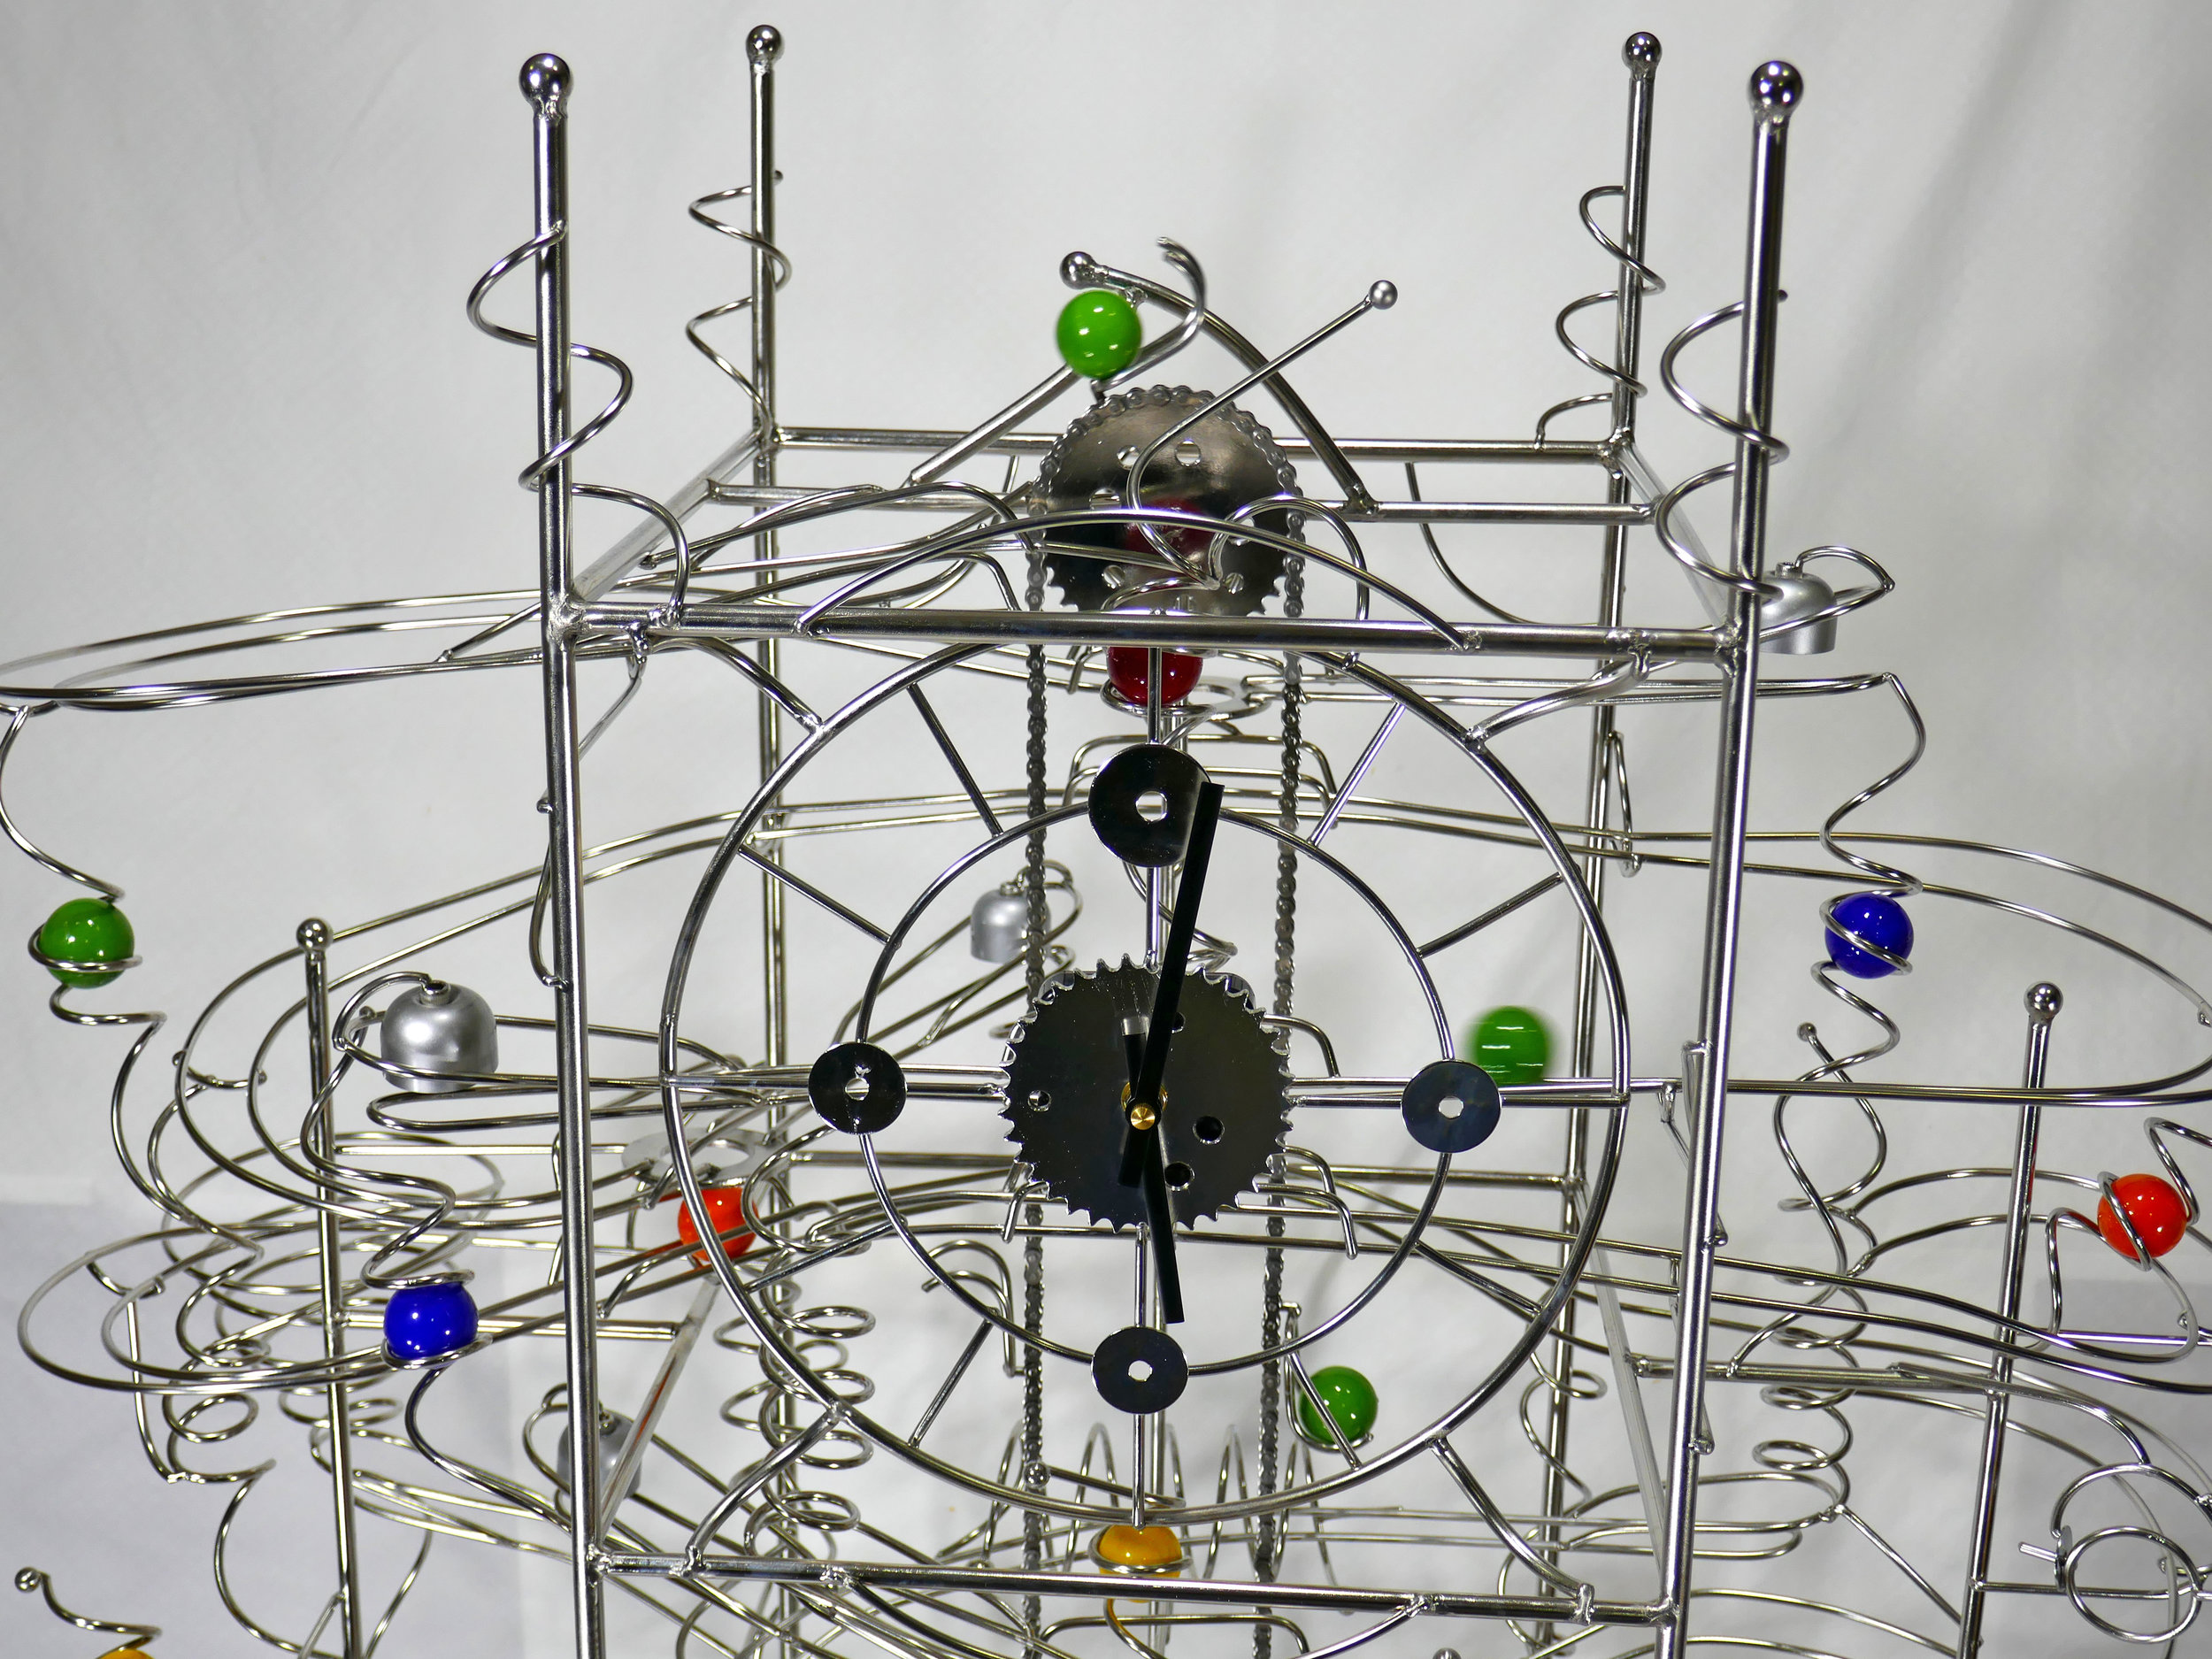 Rolling Ball marble run kinetic art by Stephen Jendro front view - Stephen Jendro